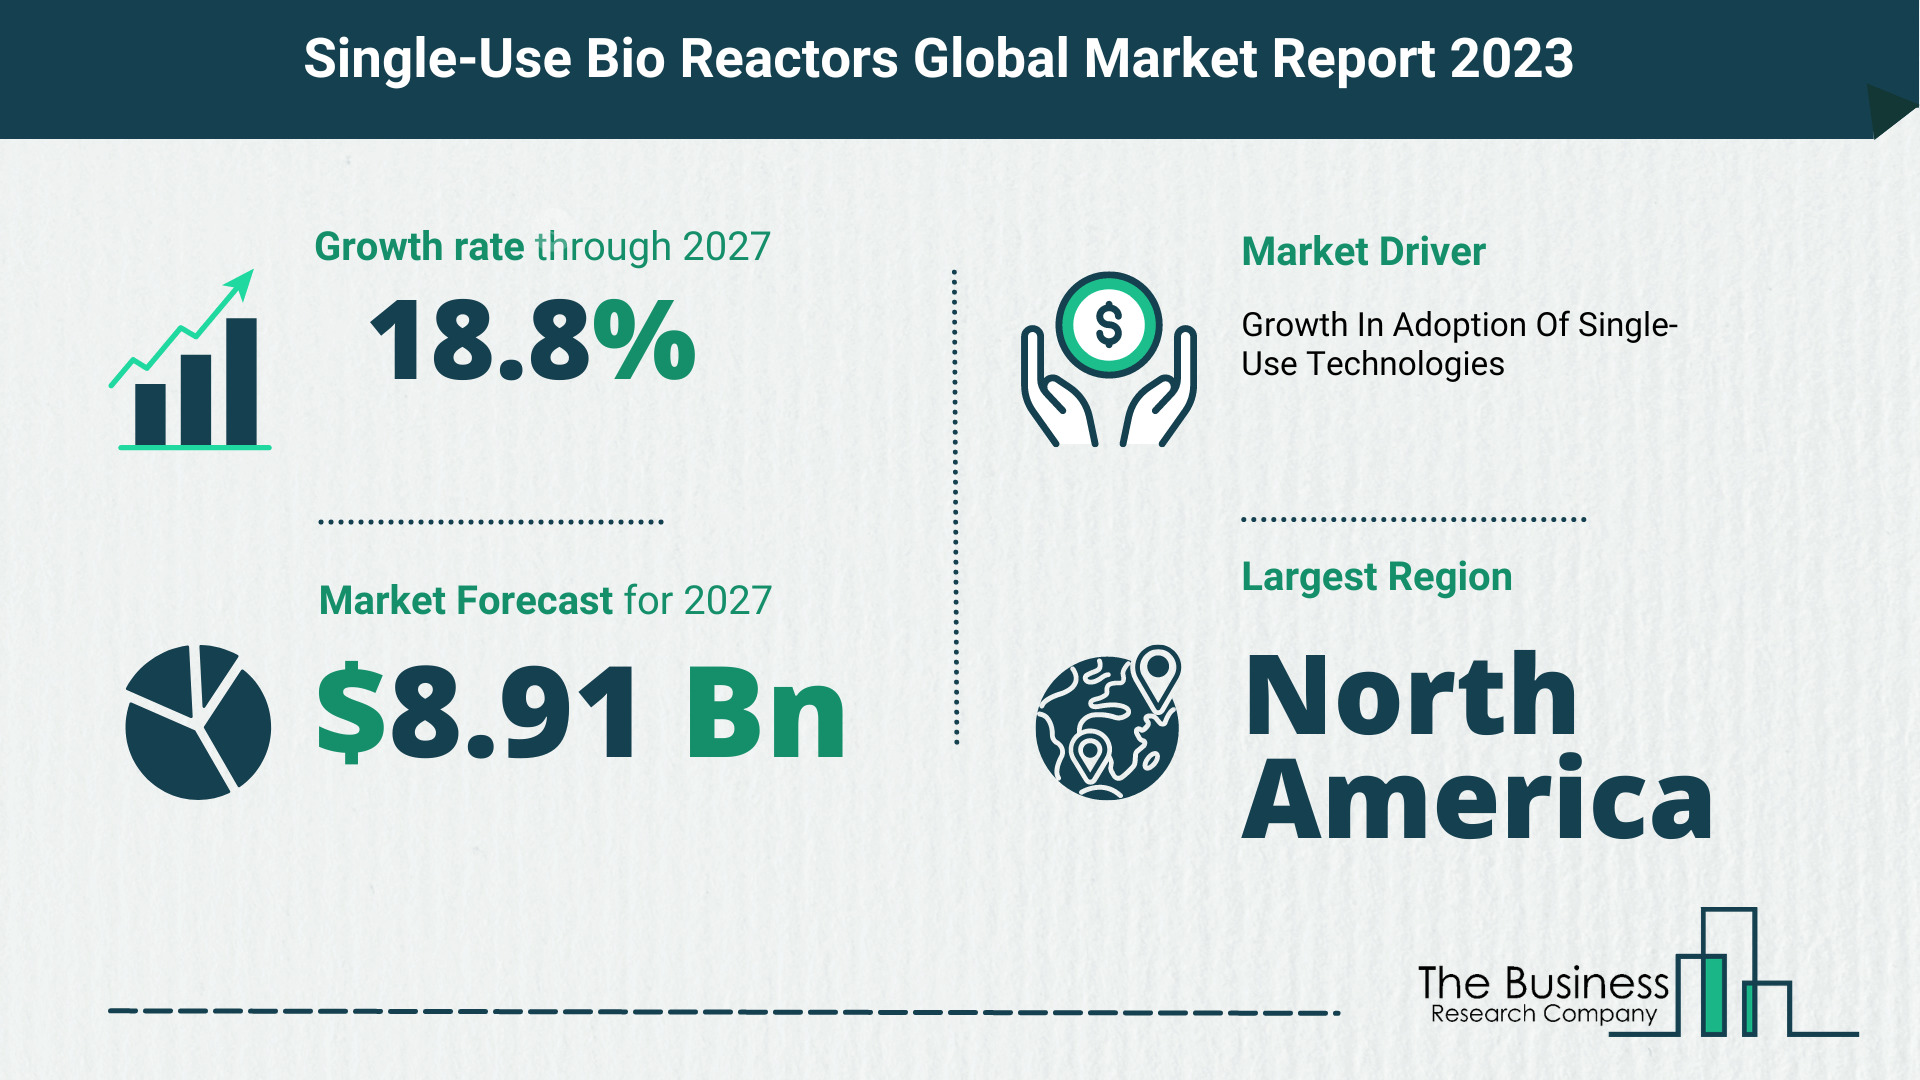 How Will The Single-Use Bio Reactors Market Globally Expand In 2023?